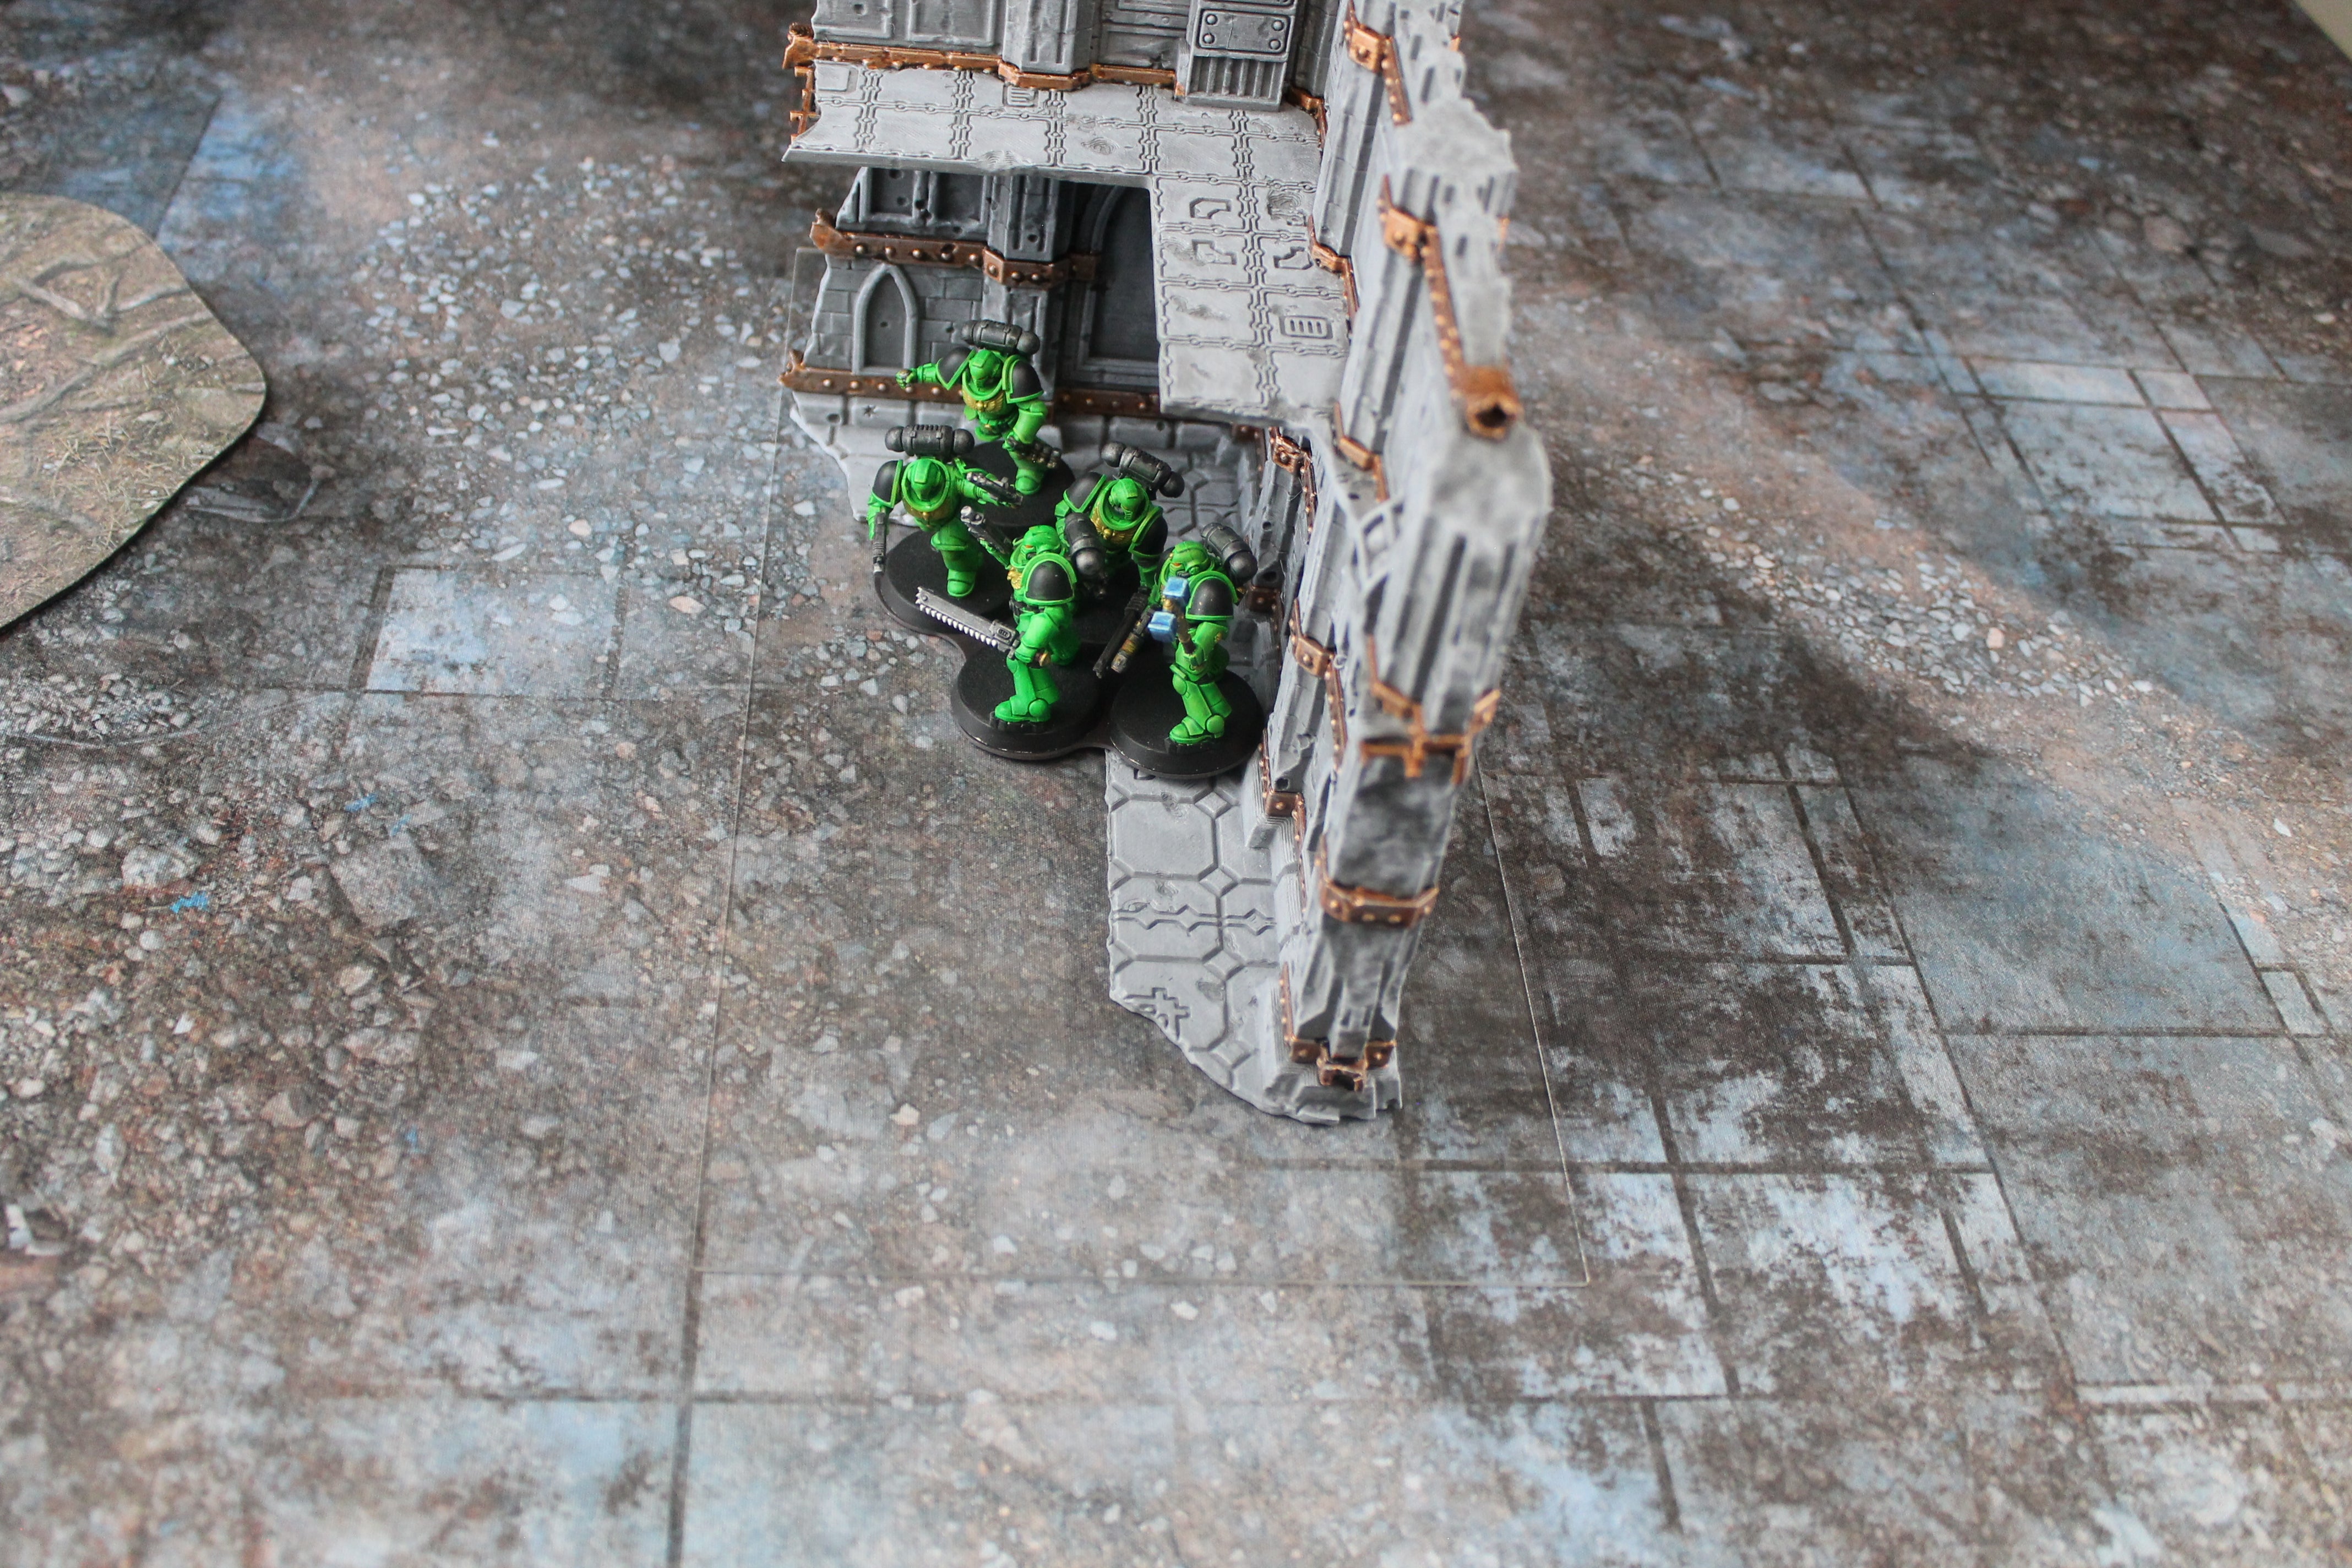 Warhammer 40K: The Best Terrain Sets To Combine - Bell of Lost Souls